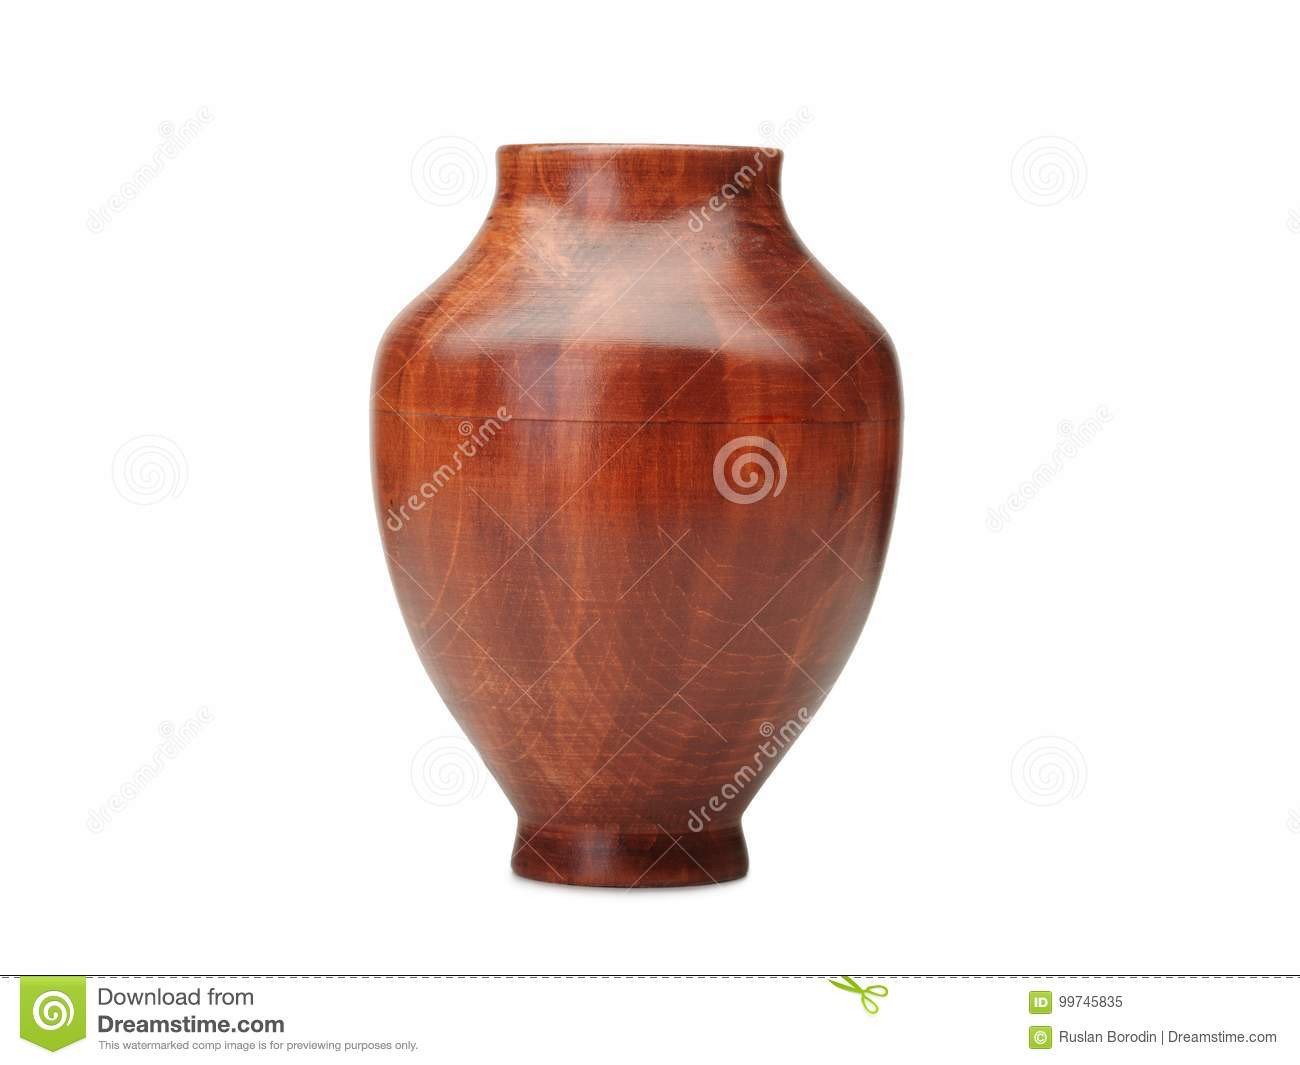 23 Trendy Small Black Glass Vase 2024 free download small black glass vase of flower vase made of wood isolated on white background stock image regarding download flower vase made of wood isolated on white background stock image image of glas